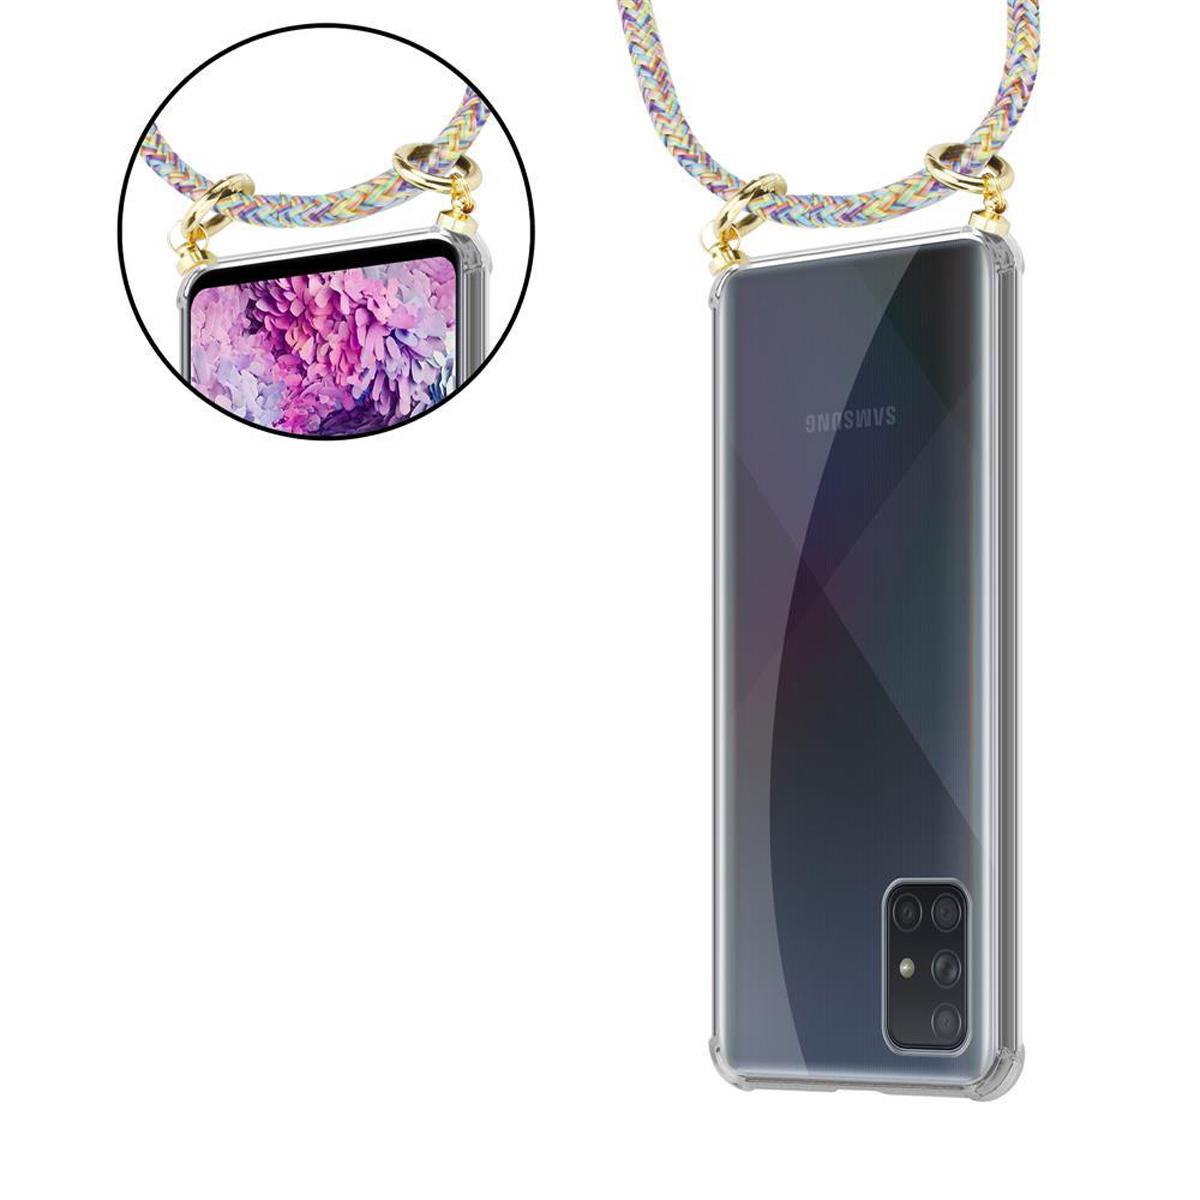 Kordel Samsung, Galaxy / mit Hülle, CADORABO Backcover, Ringen, A51 abnehmbarer M40s, Gold Kette und RAINBOW 4G Band Handy